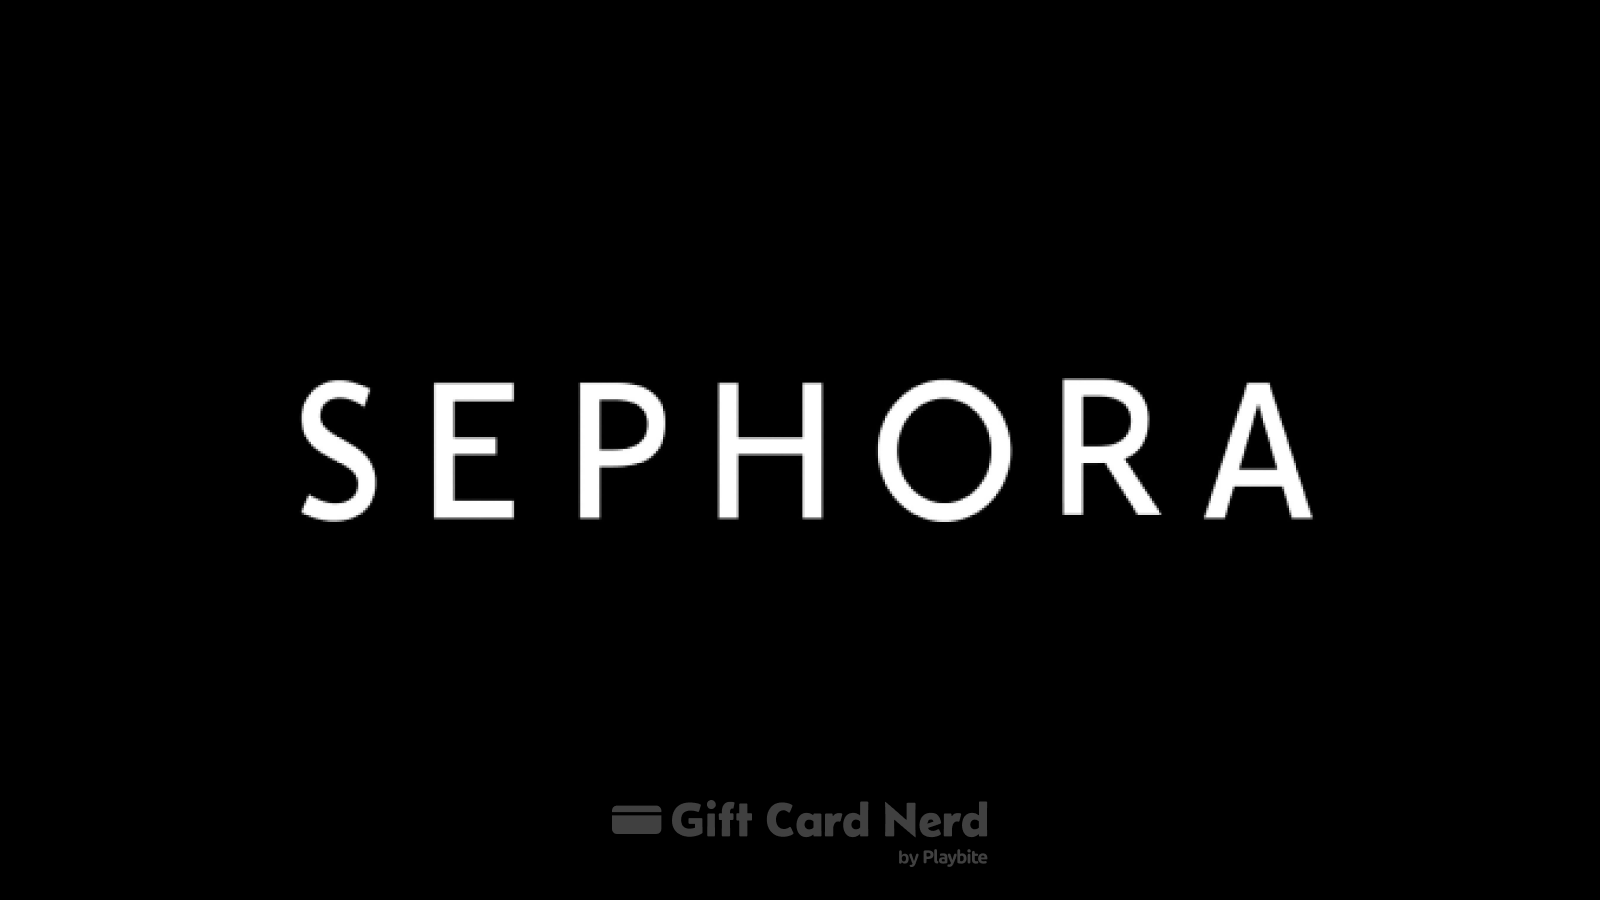 Can I Use a Sephora Gift Card on Amazon?